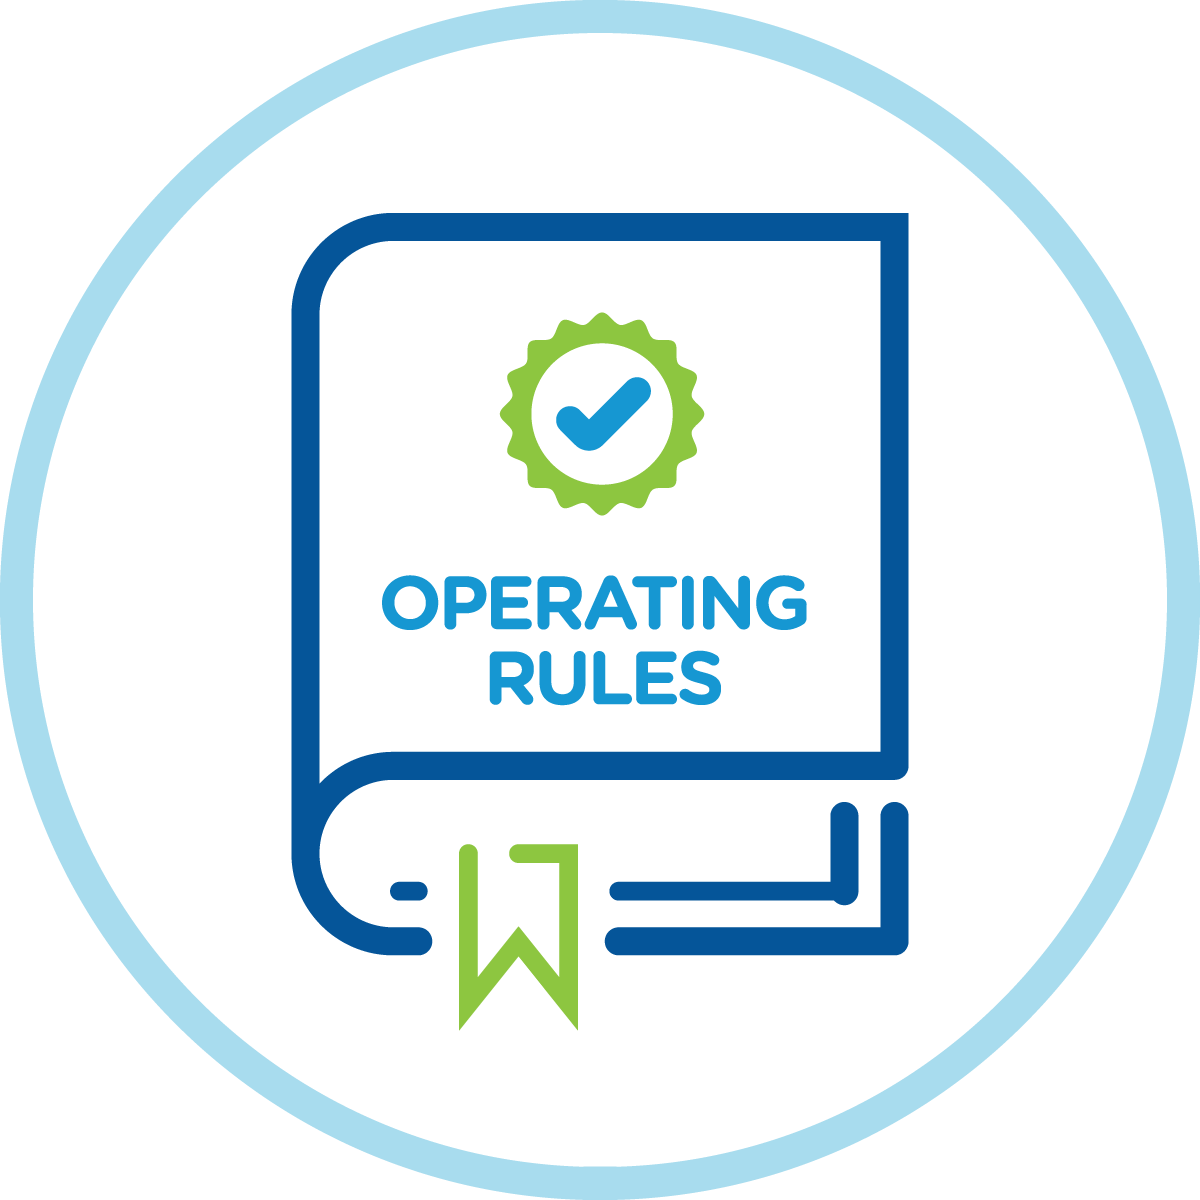 Operating rules icon